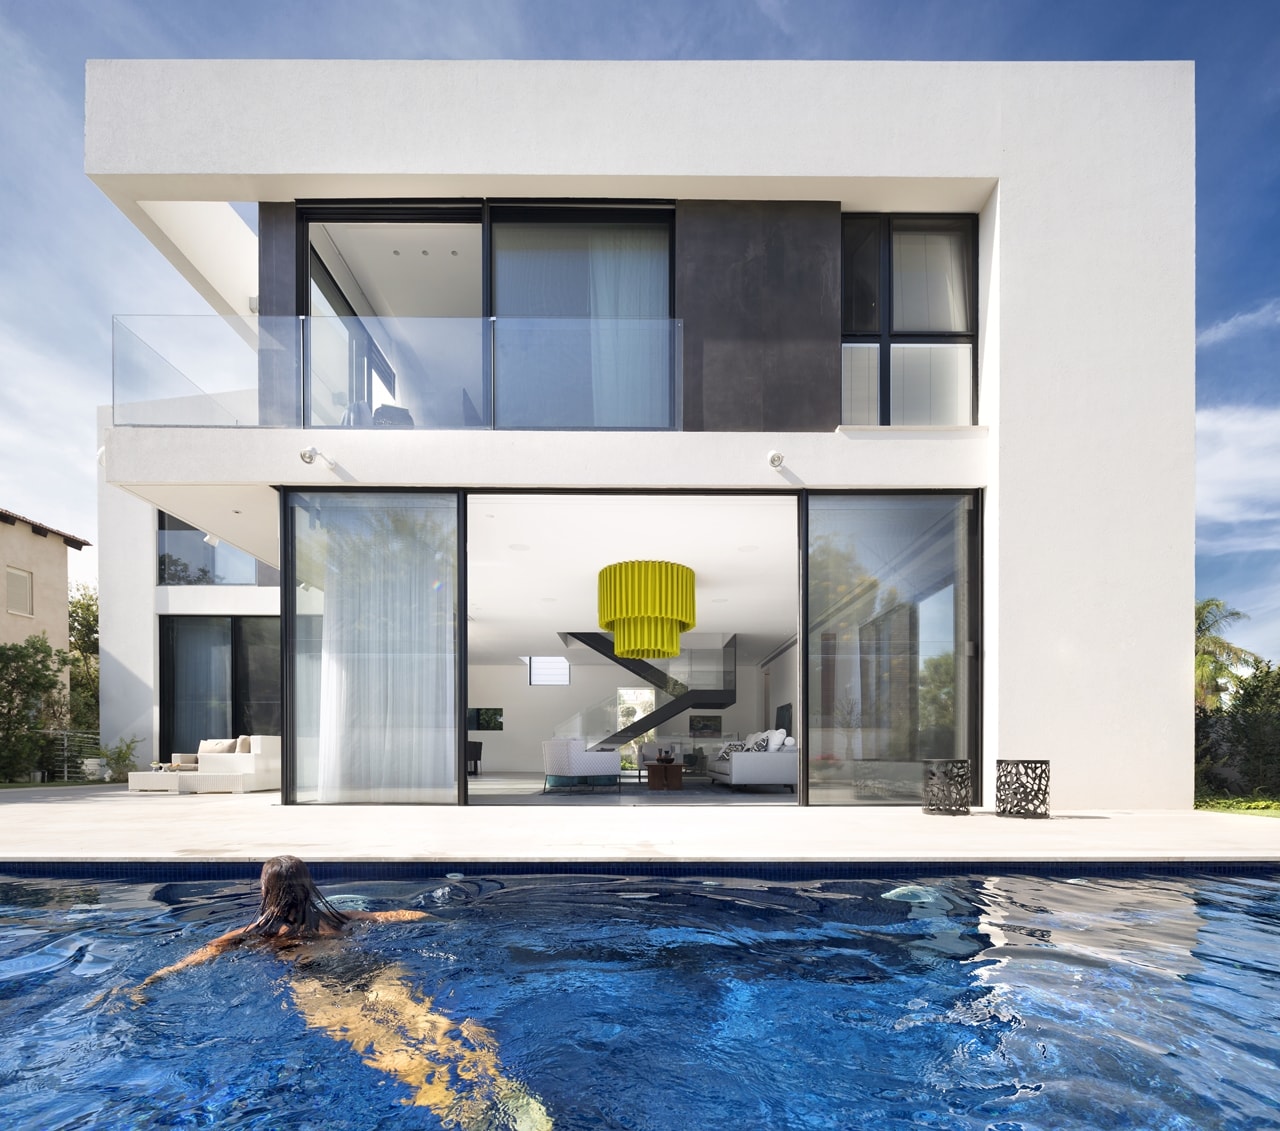 Swimming pool of simple modern home by Sachar-Rozenfeld Architects